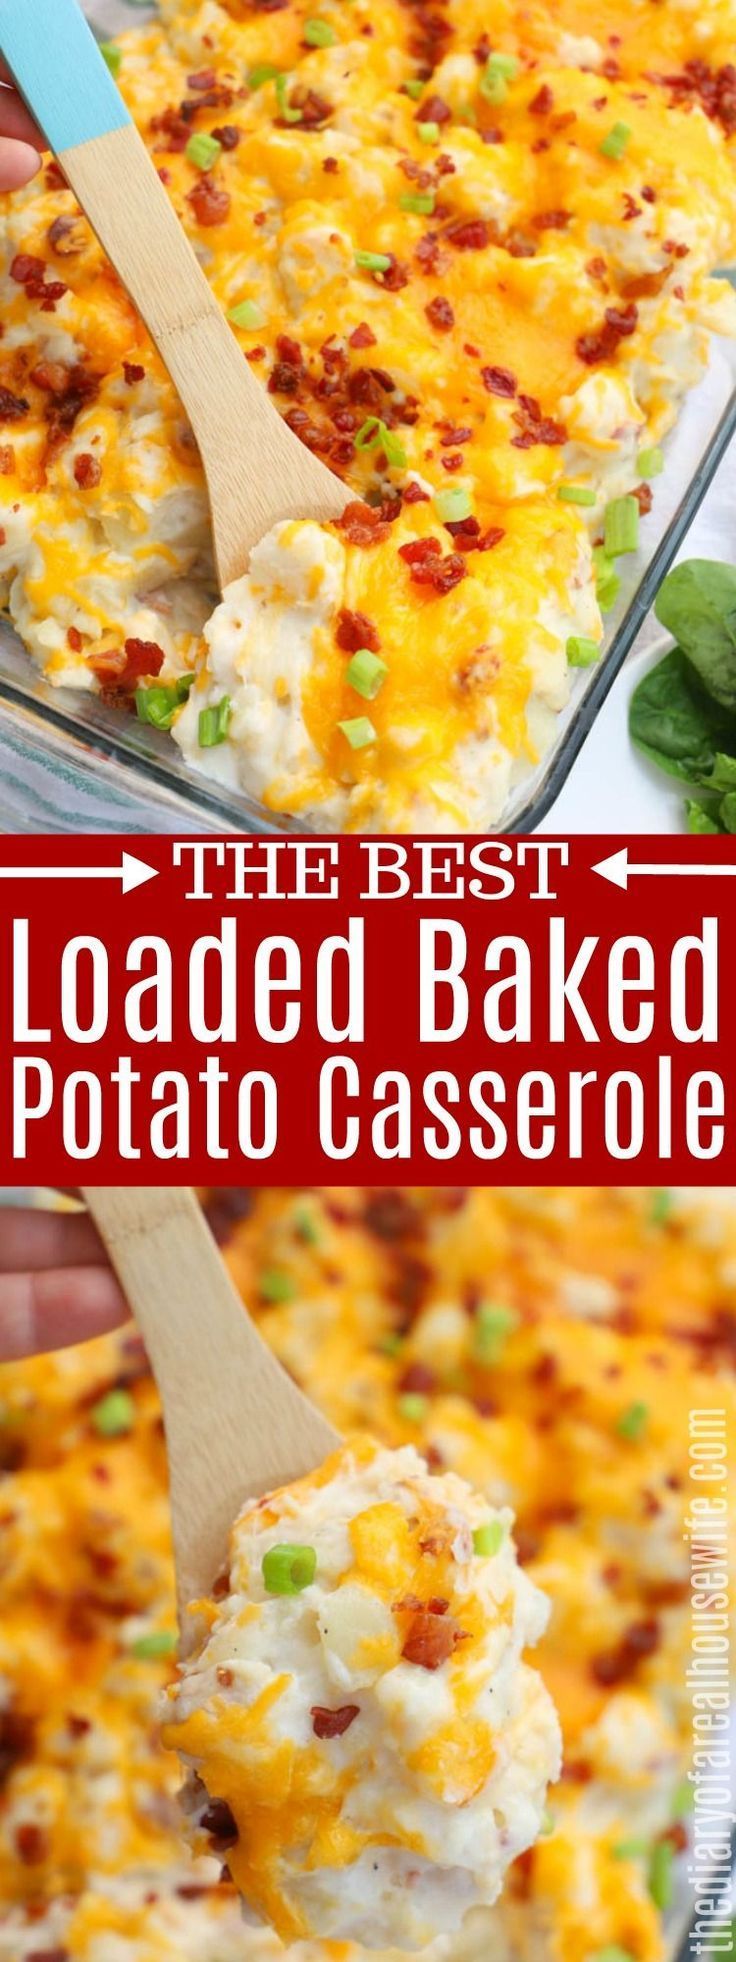 Loaded Baked Potato Casserole - The Diary of a Real Housewife -   19 thanksgiving side dishes crockpot ideas